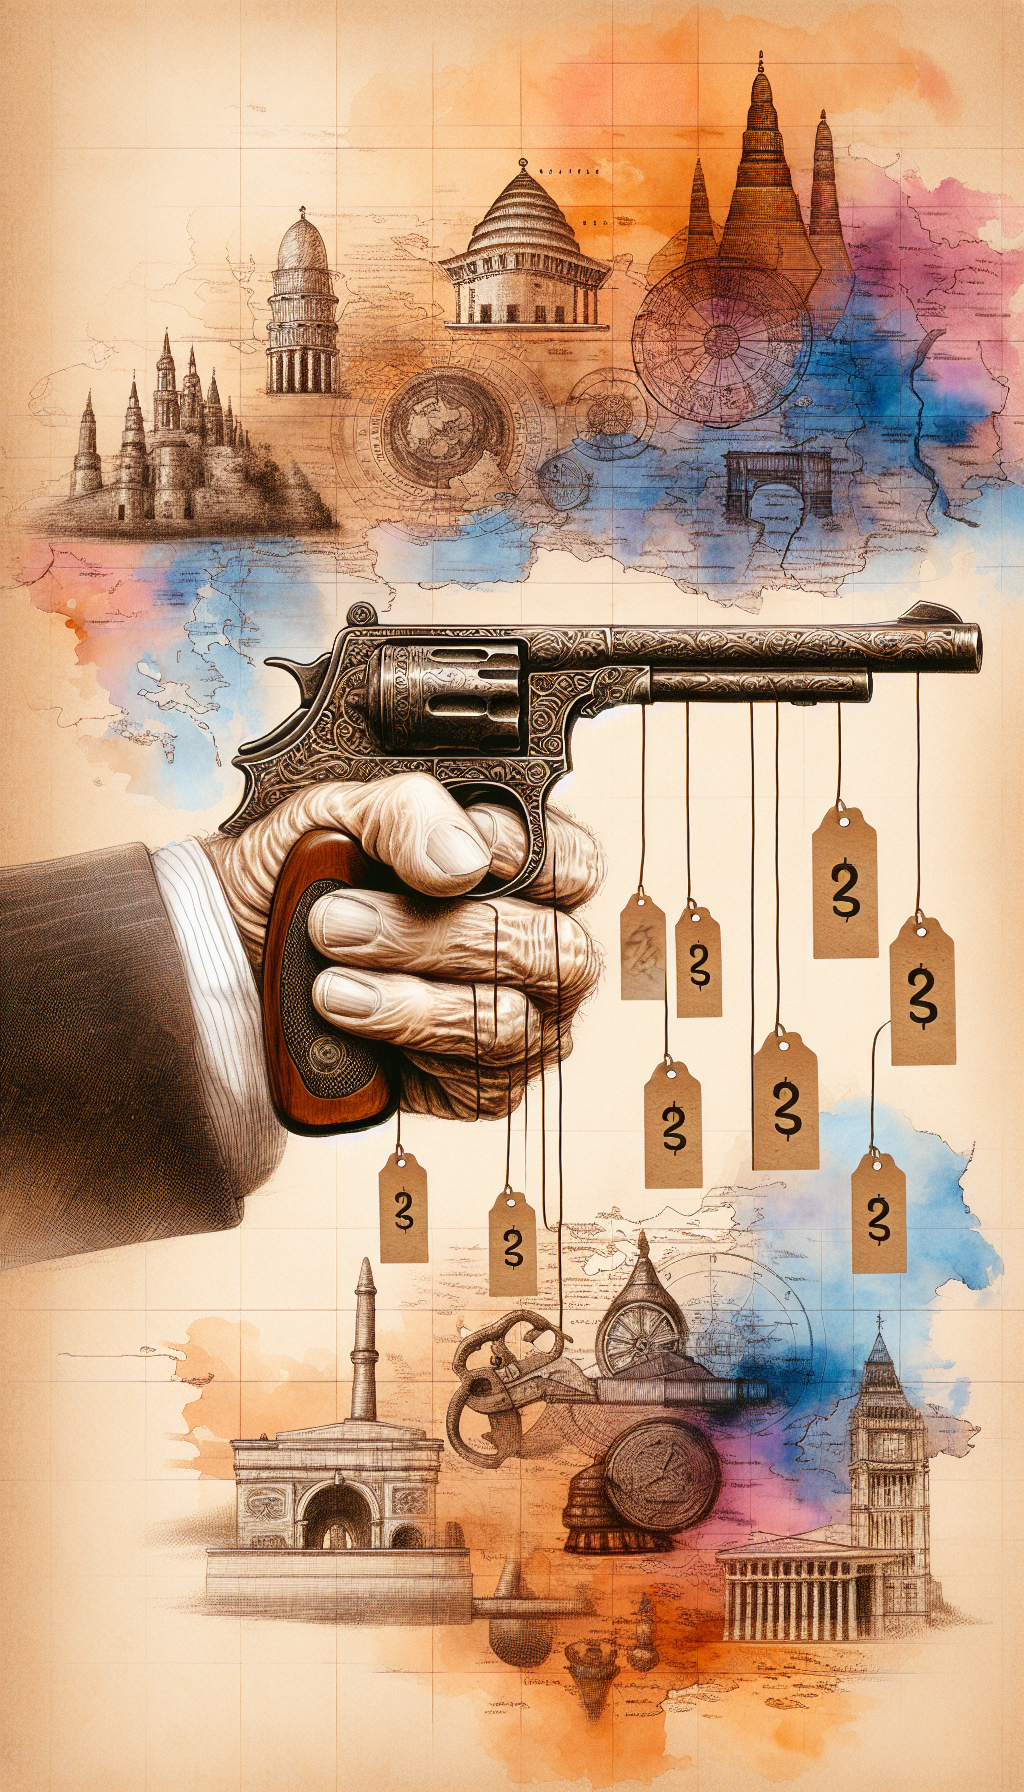 An aged hand gently cradles a vintage pistol, hovering over a faded map strewn with iconic landmarks and cultural symbols, subtle price tags dangle from each. The backdrop shifts from sketched lines to bold watercolors, blending past and present, suggesting the gun's journey through history and its rising value.